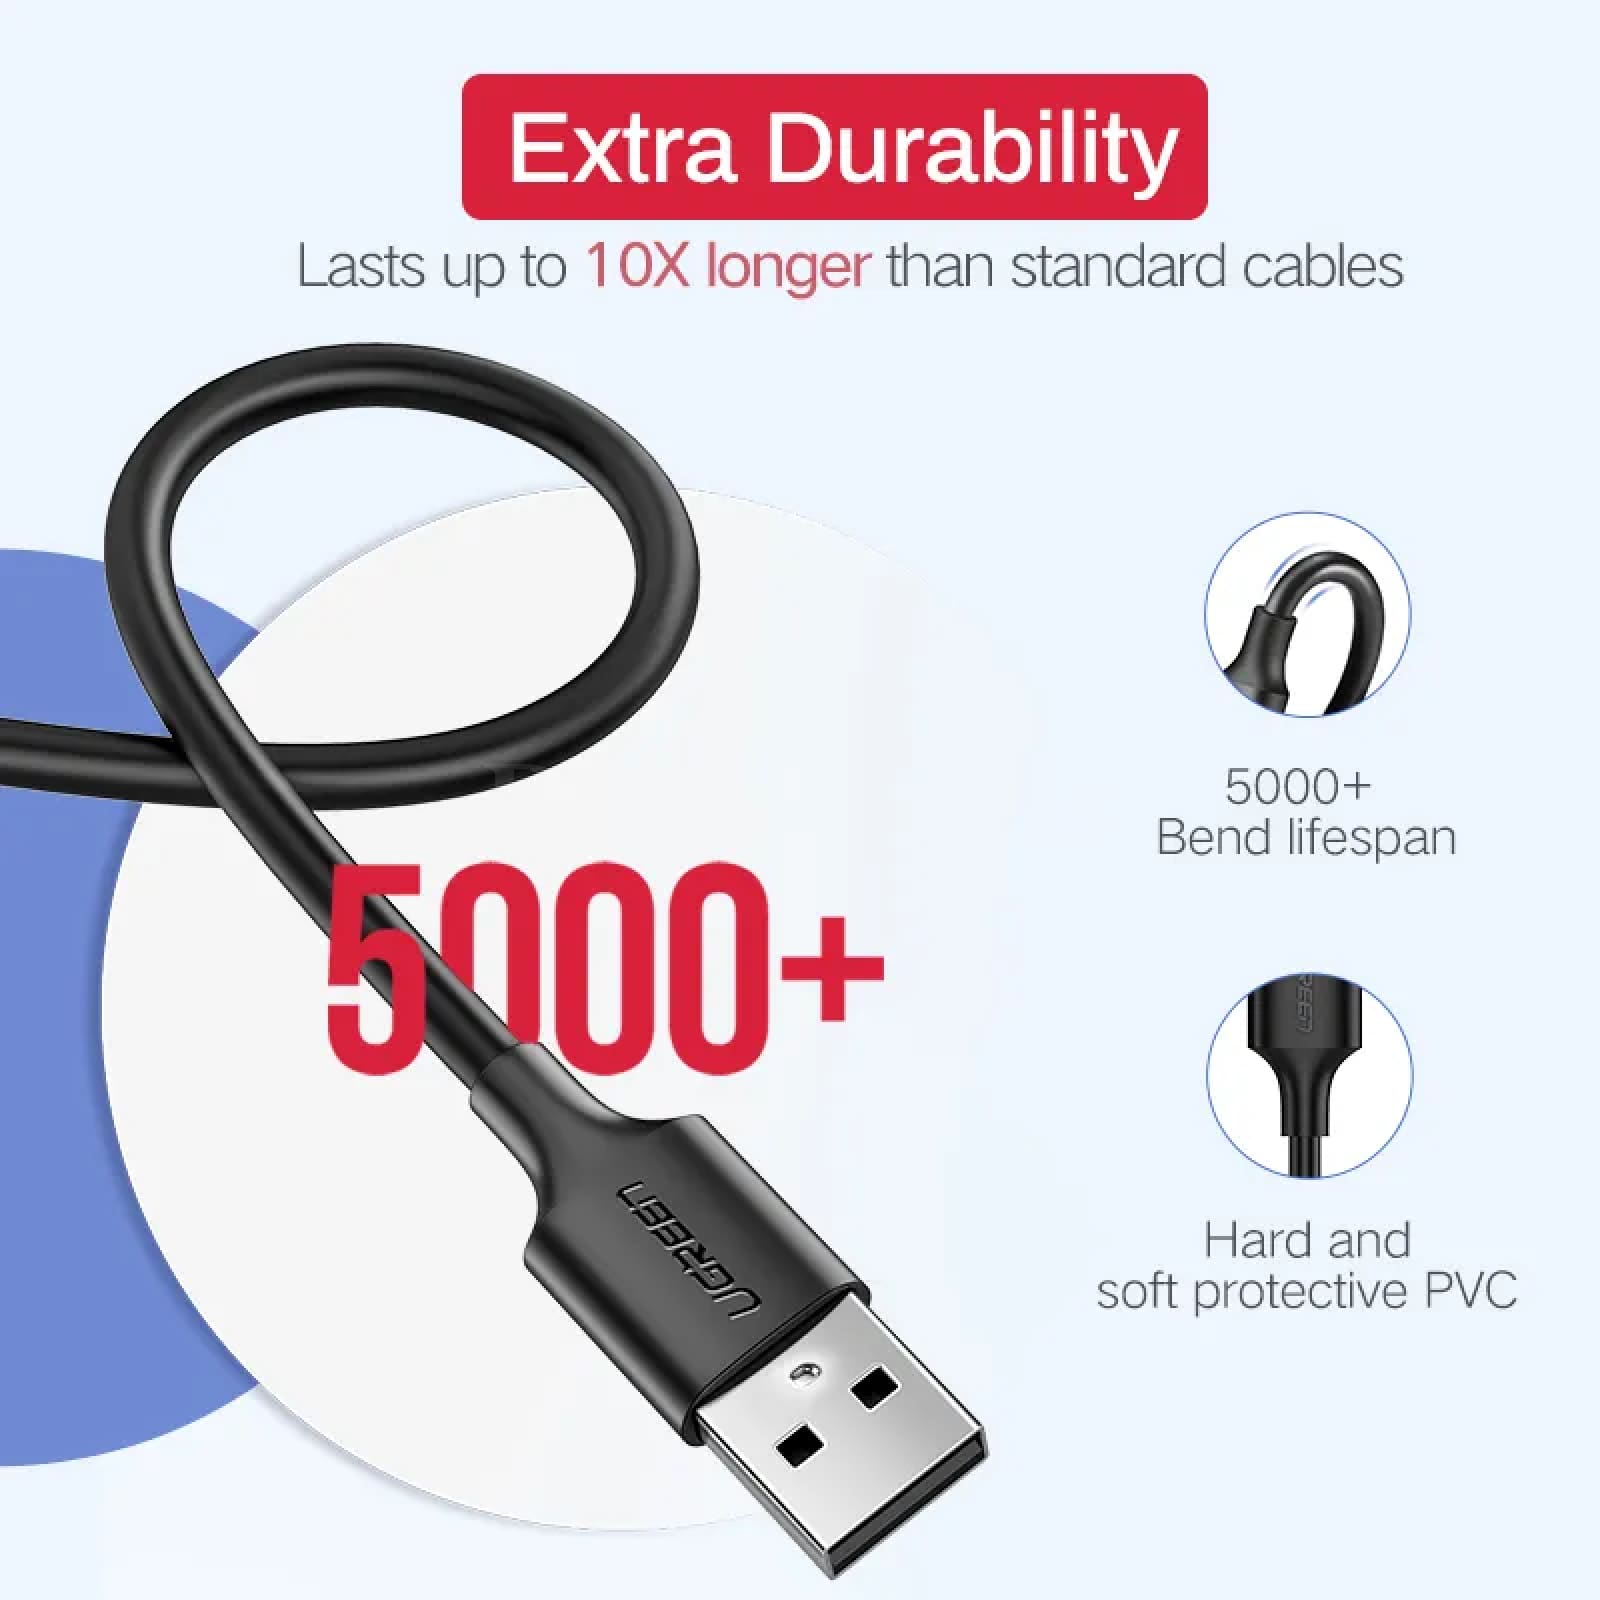 Ugreen Micro Usb Cable 3A Fast Charging Data Cord For Samsung Htc Lg Android 301635-